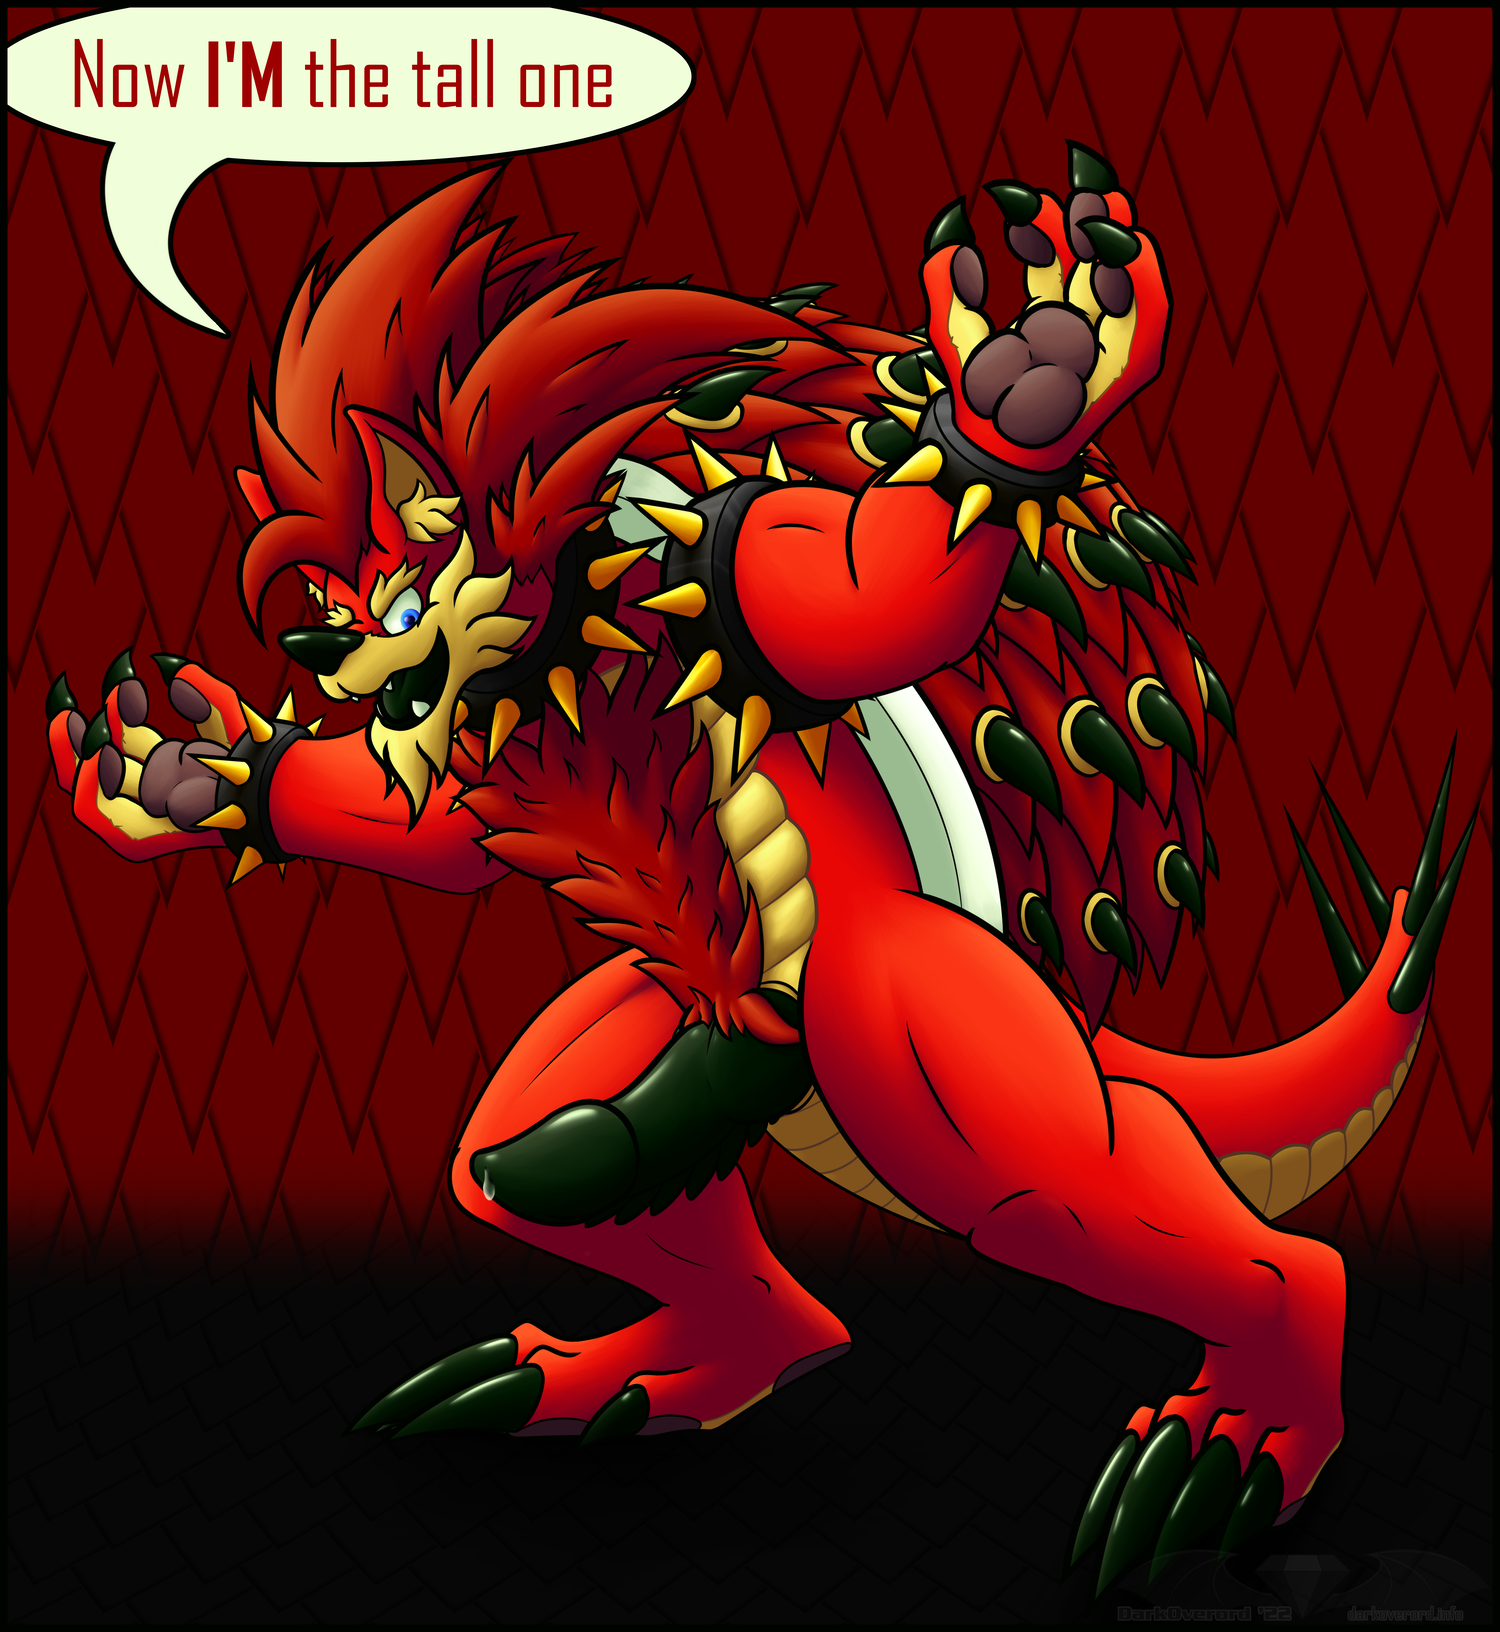 Simon Rickson, a non-binary red hedgehog, except looking like bowser-hedgehog hybrid and sporting a large cock that is dripping with pre. Text reads "Now I'M the tall one" with "I'M" in bold